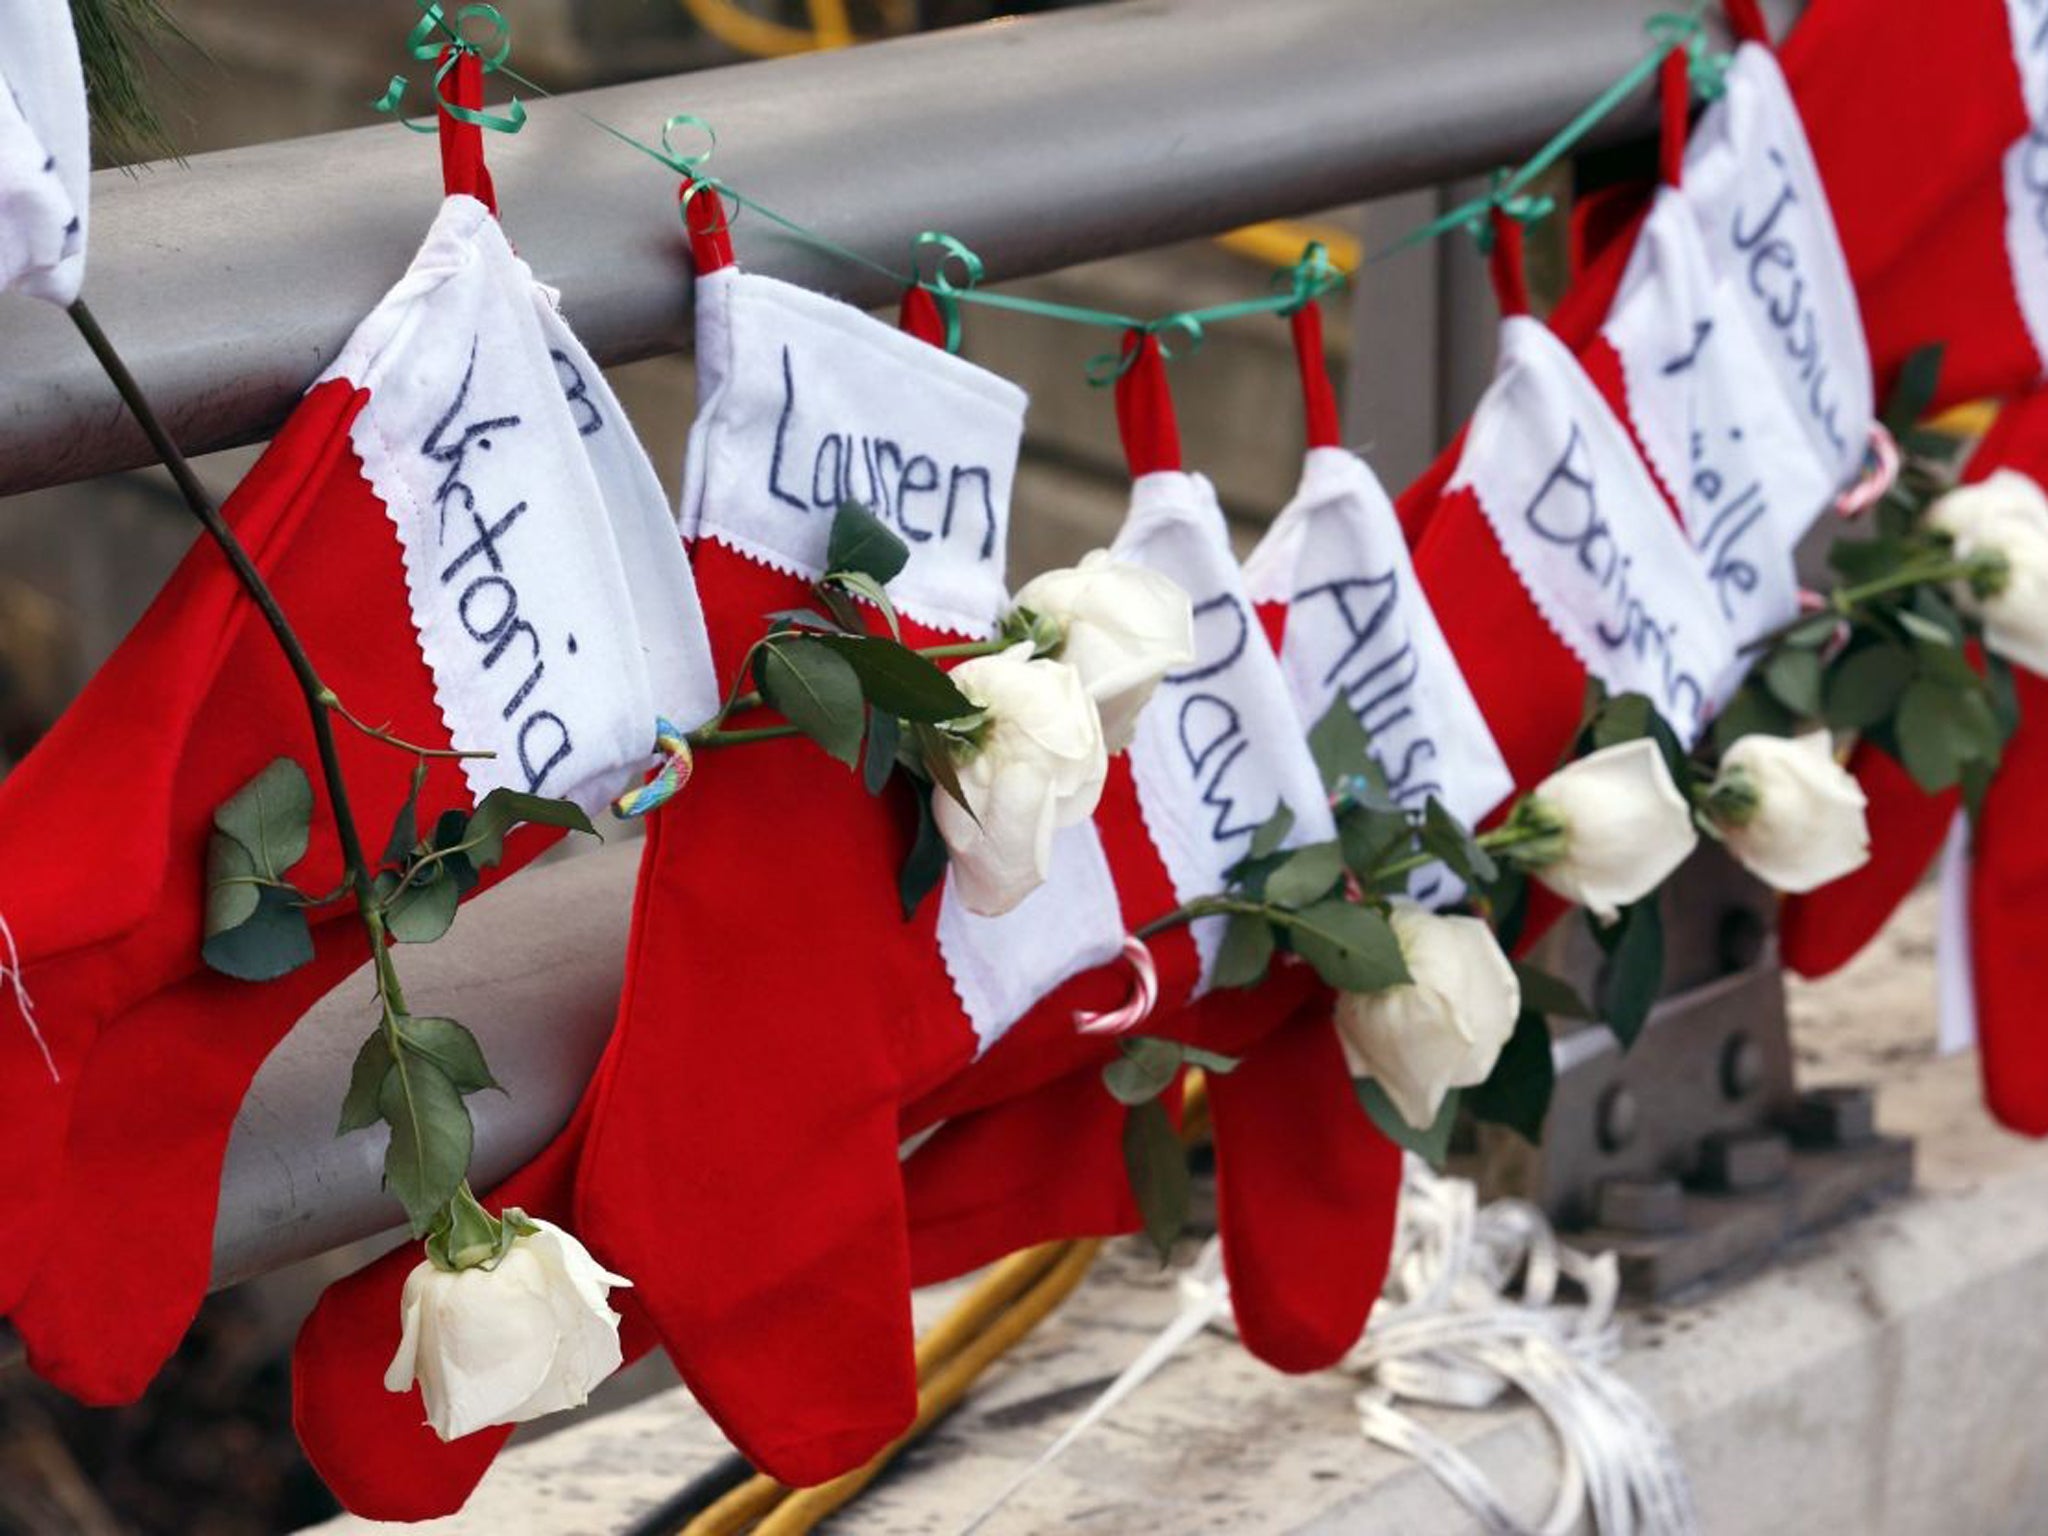 Christmas stockings with the names of shooting victims hang from railing near a makeshift memorial near the town Christmas tree in the Sandy Hook village of Newtown